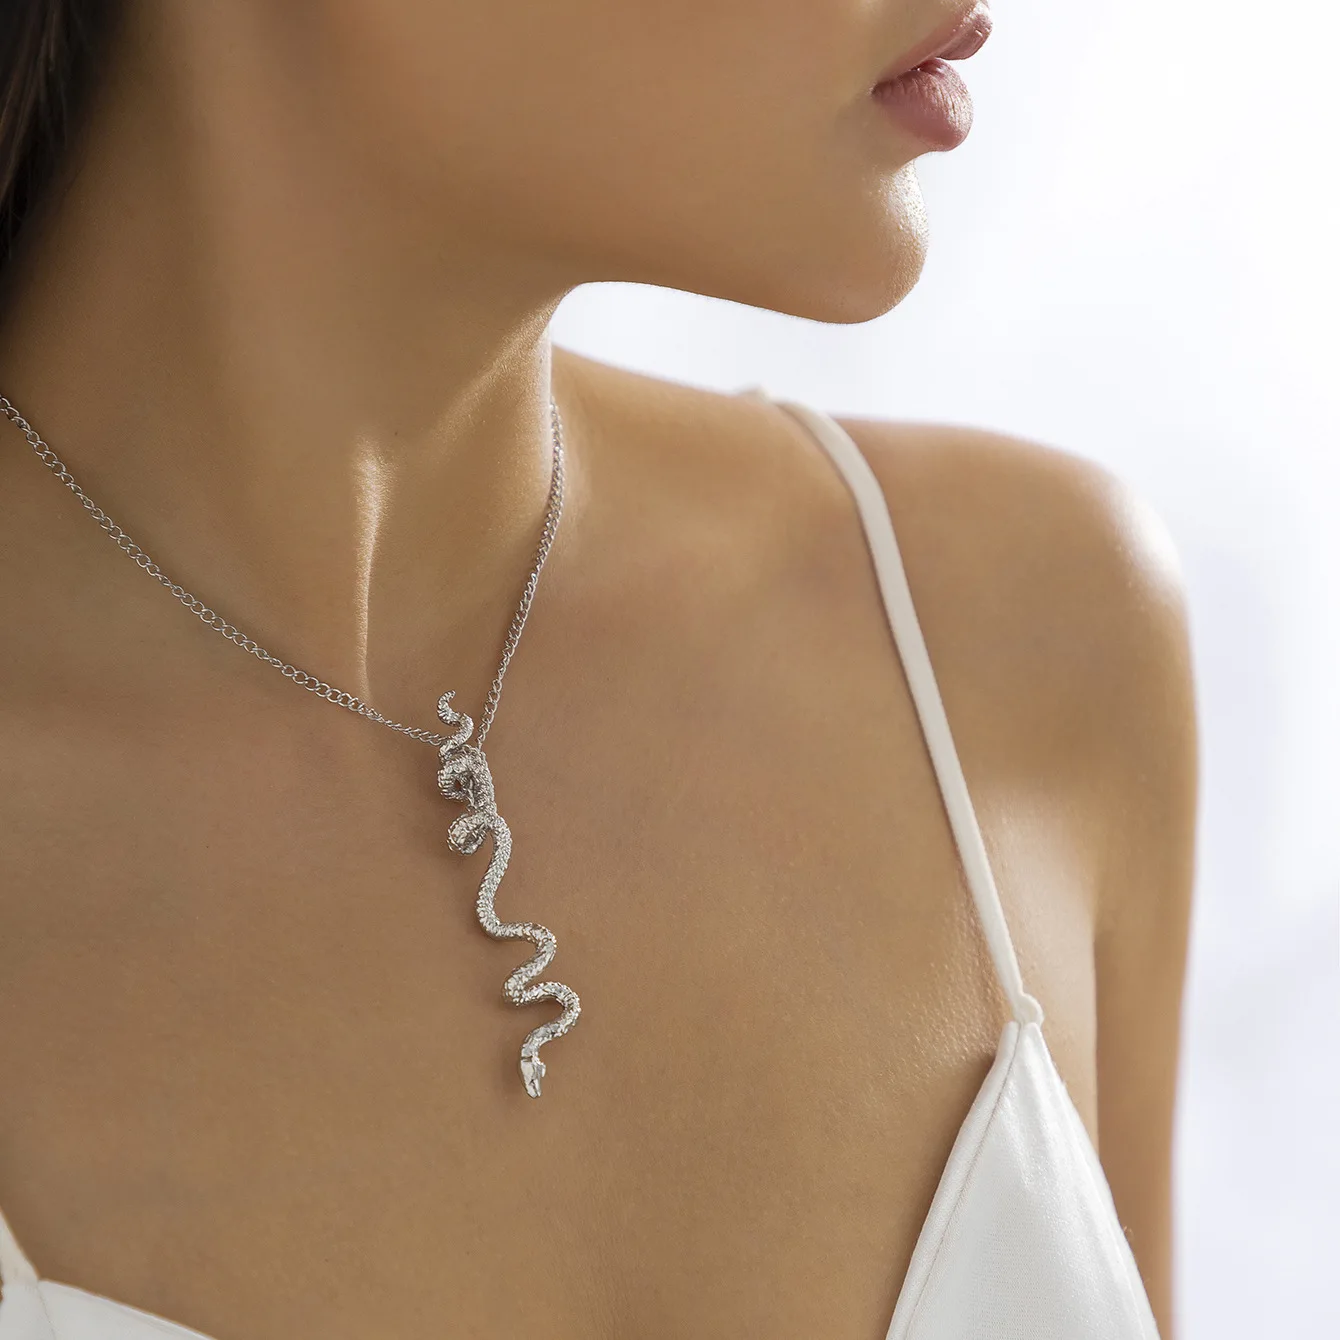 

New Fashion Gold Winding Snake Necklace Metal Wind Chain Clavicle Chain Women Jewelry Gift